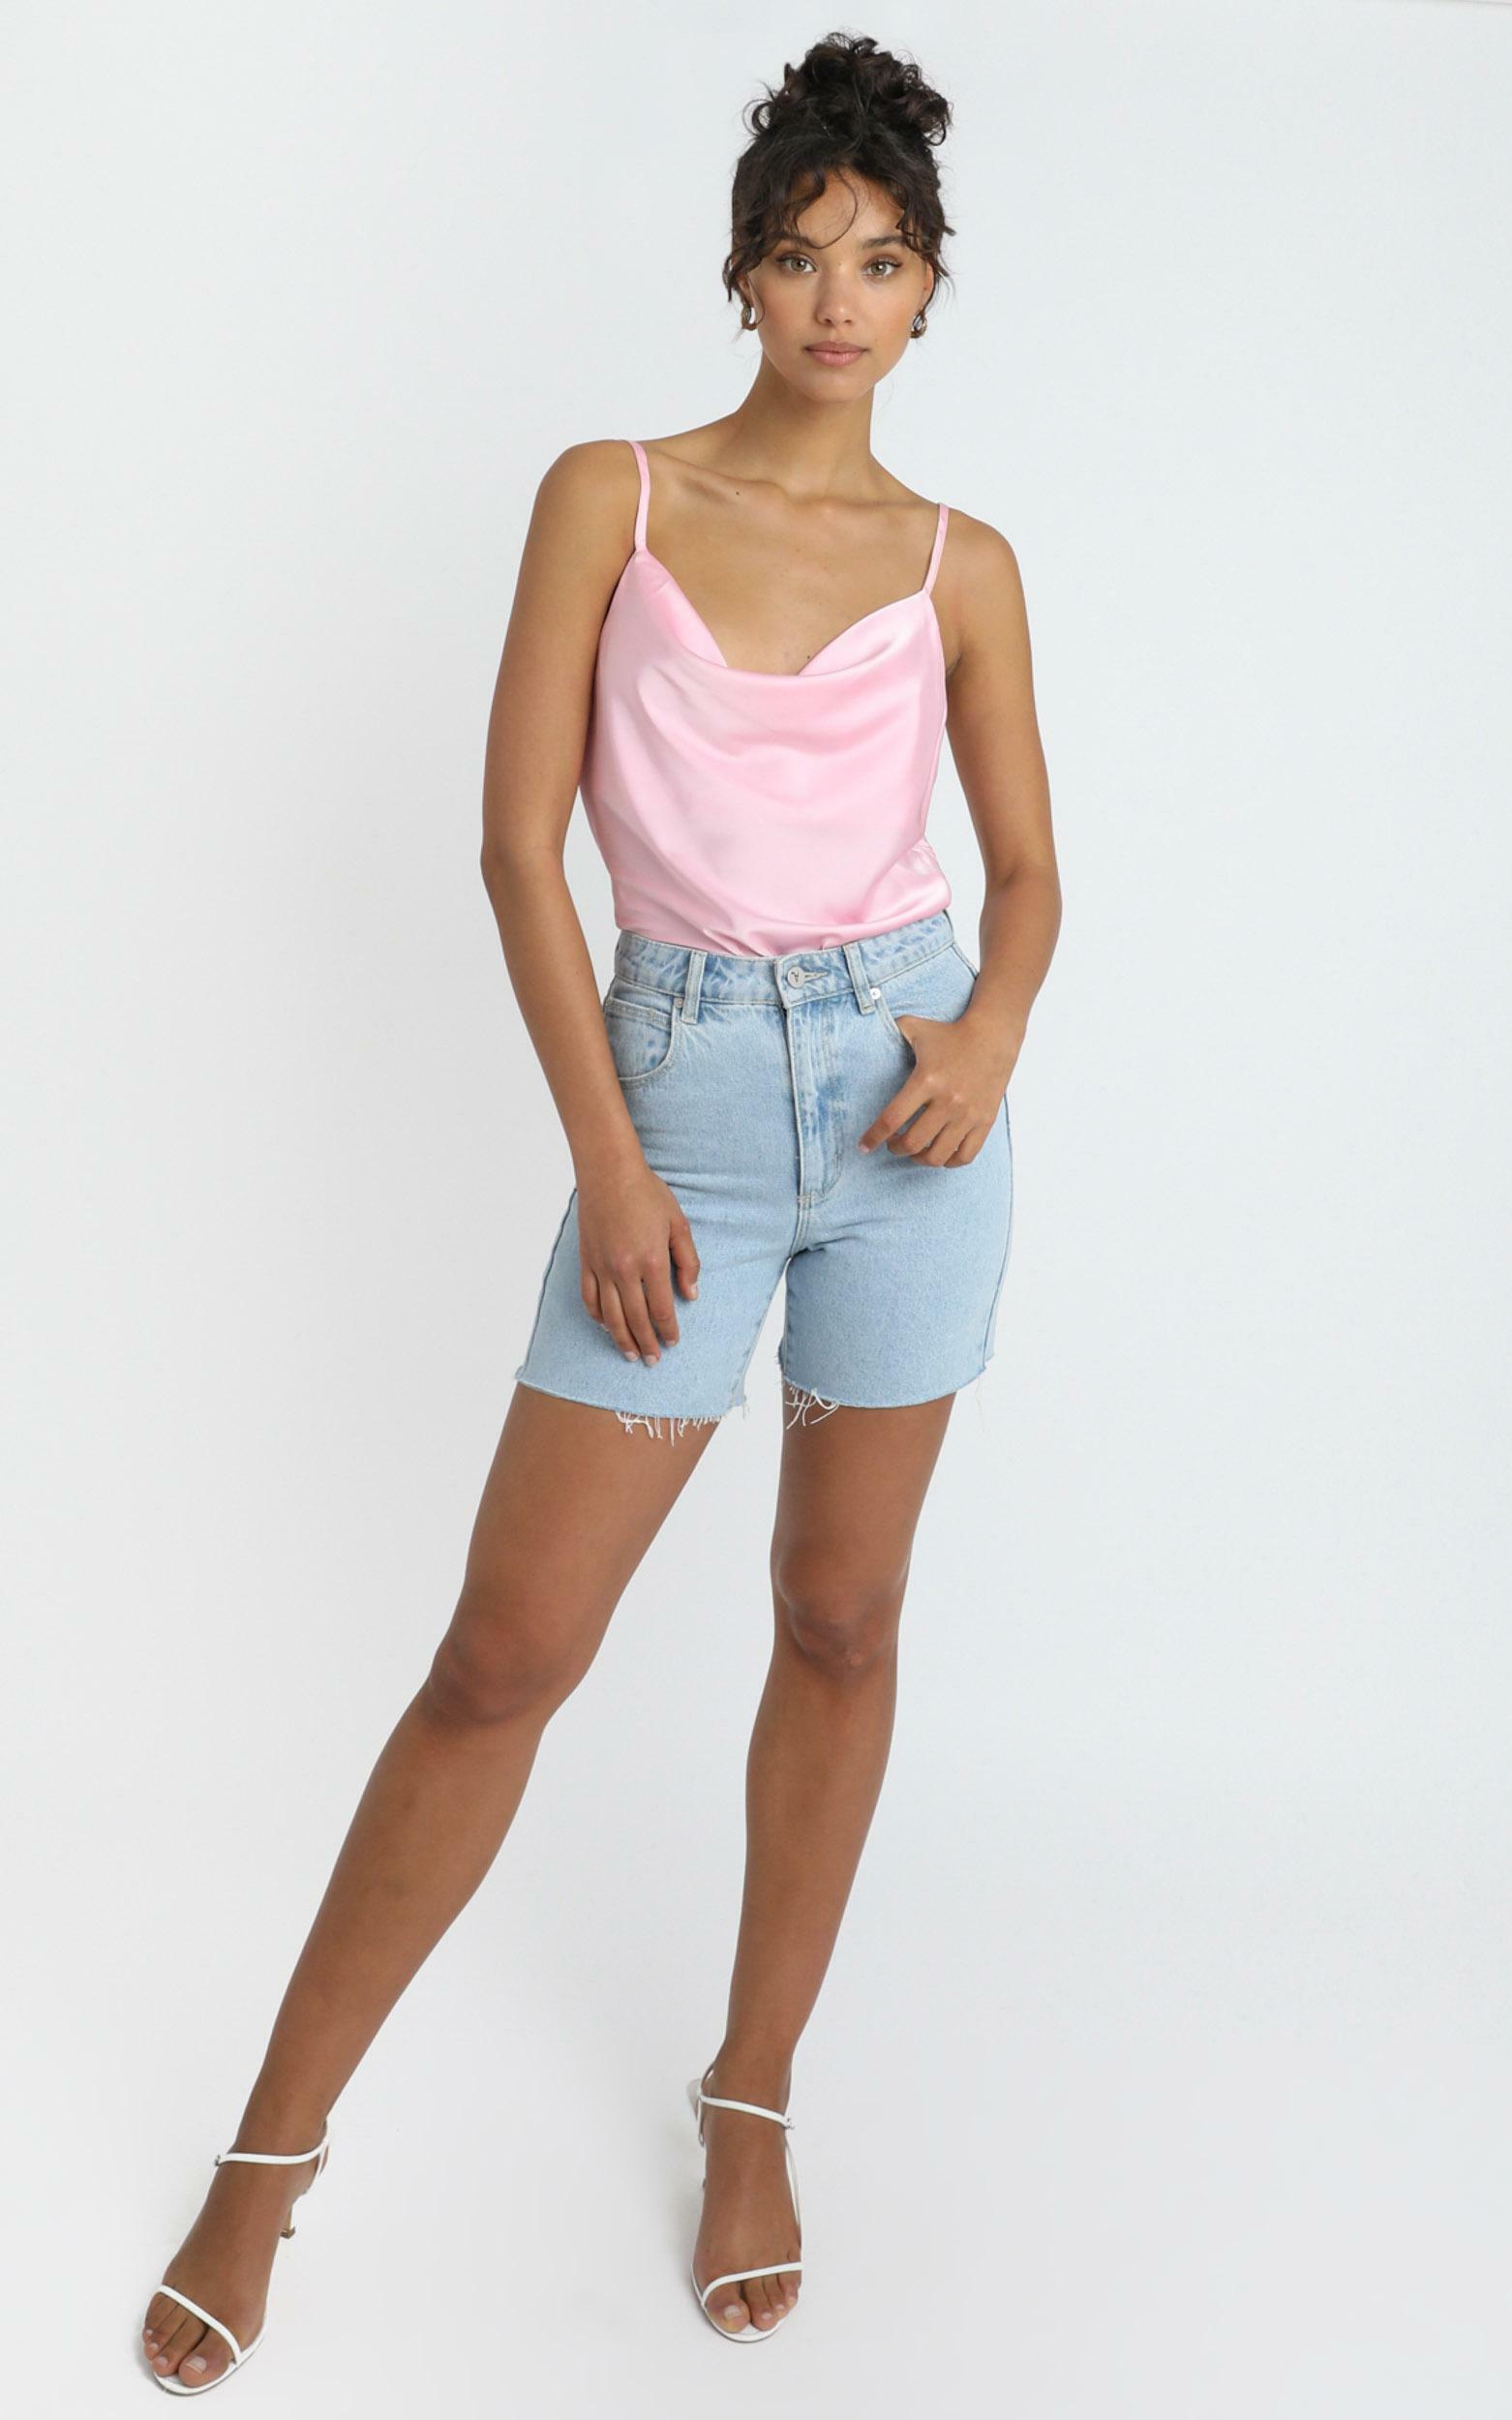 Straight Line Top in Soft Pink - 04, PNK3, hi-res image number null